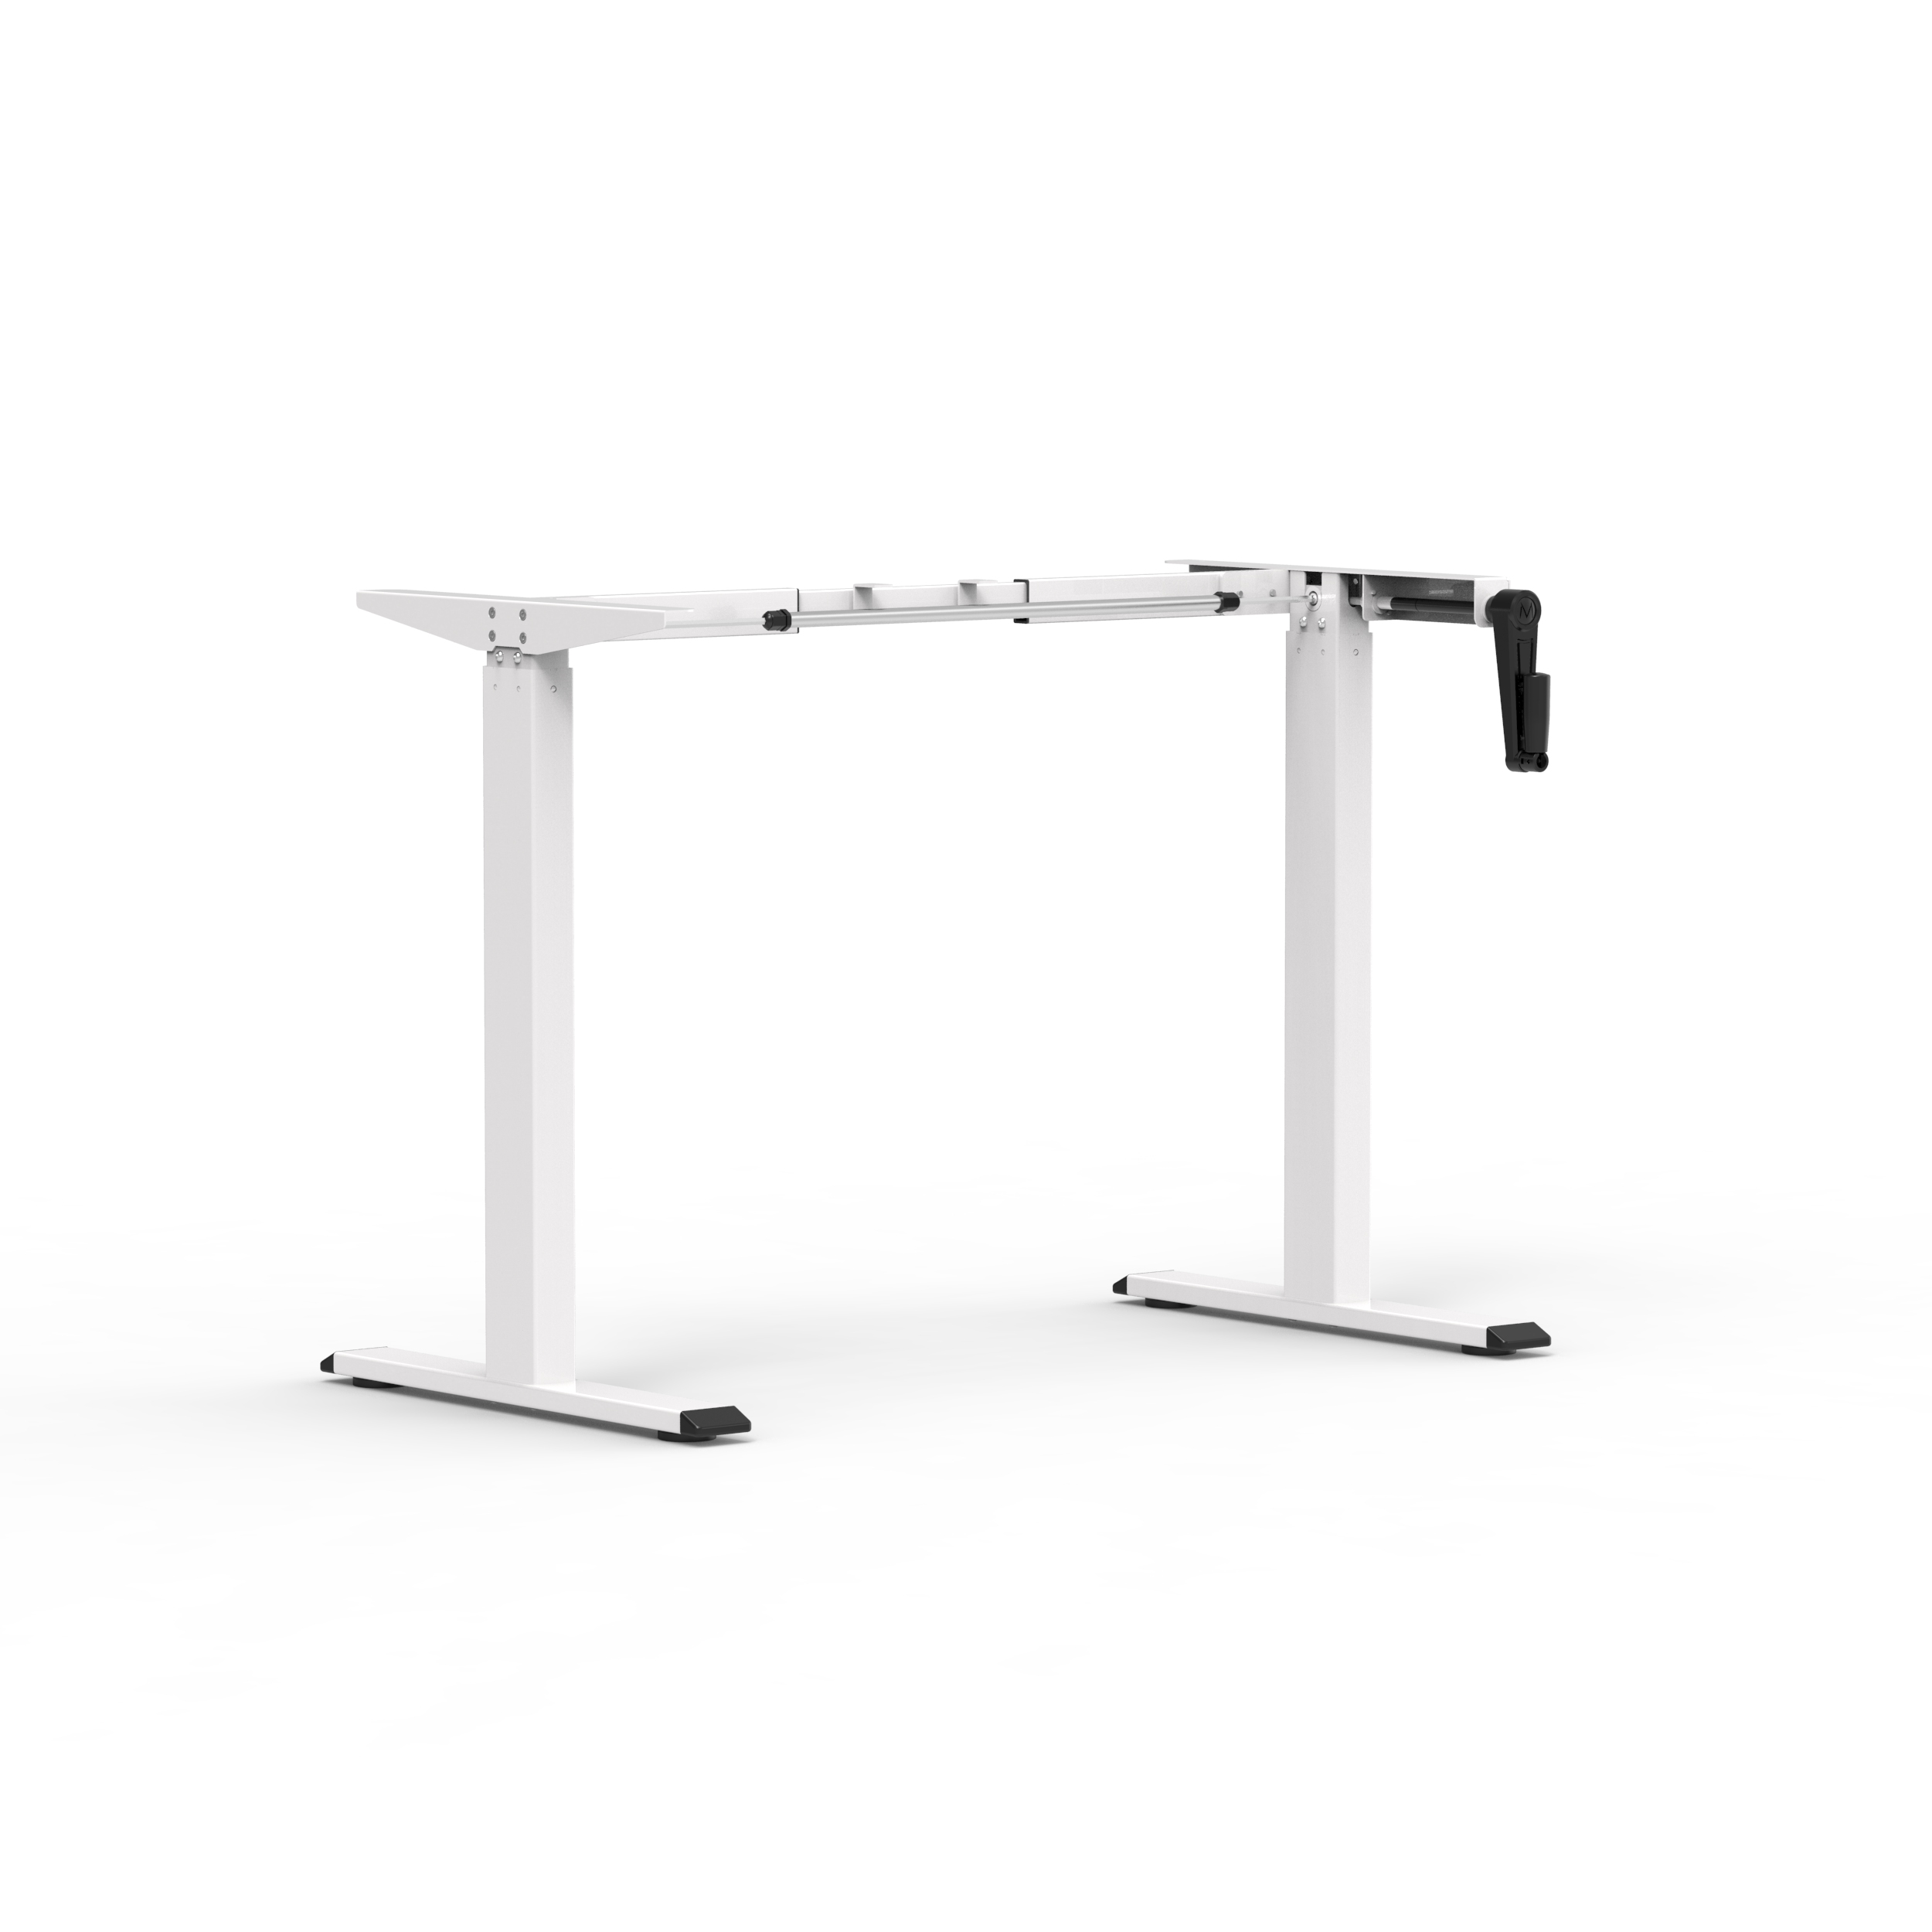 NT33-2M2(B) Steel Adjustable Desk Height Stand Up Ergonomic Electric Lift Table Legs Office Furniture Work Table